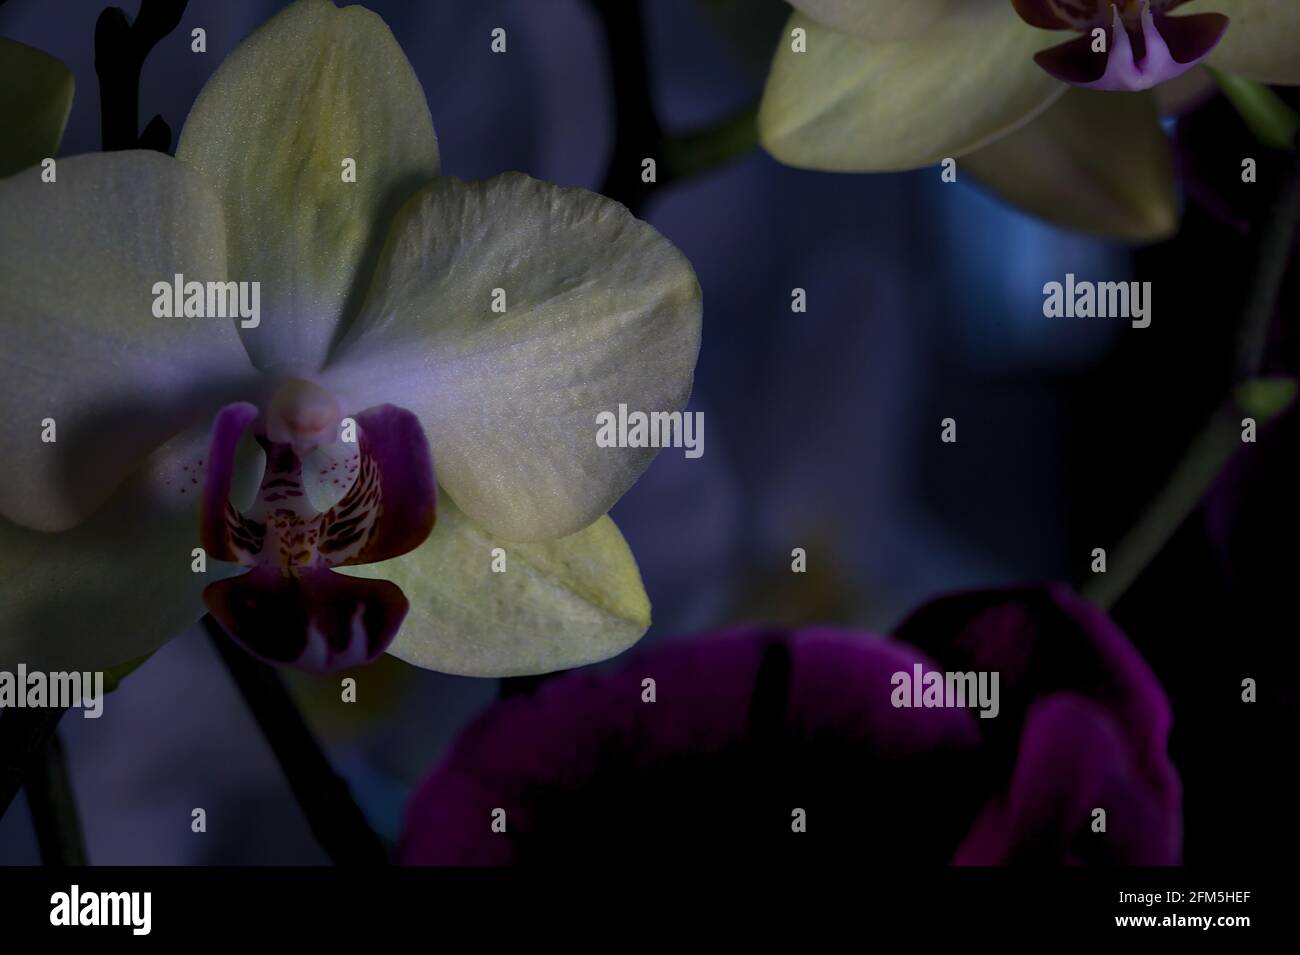 Group of phalaenopsis orchids in various colors seen up close Stock Photo